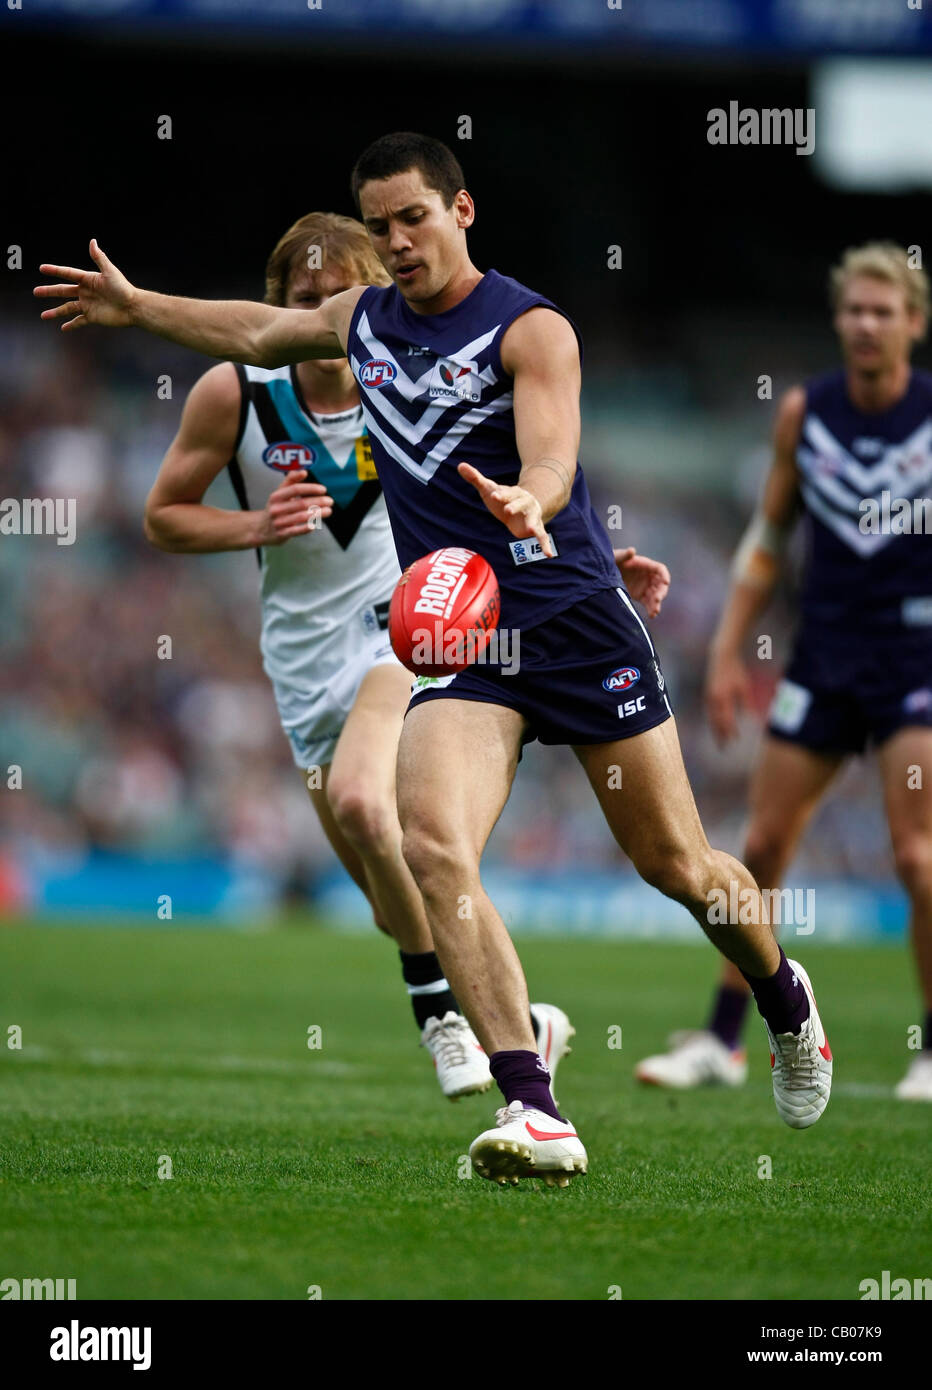 13.05.2012 Subiaco, Australia. Fremantle v Port Adelaide. Greg Broughton in action during the Round 7 game played at Patersons Stadium. Stock Photo